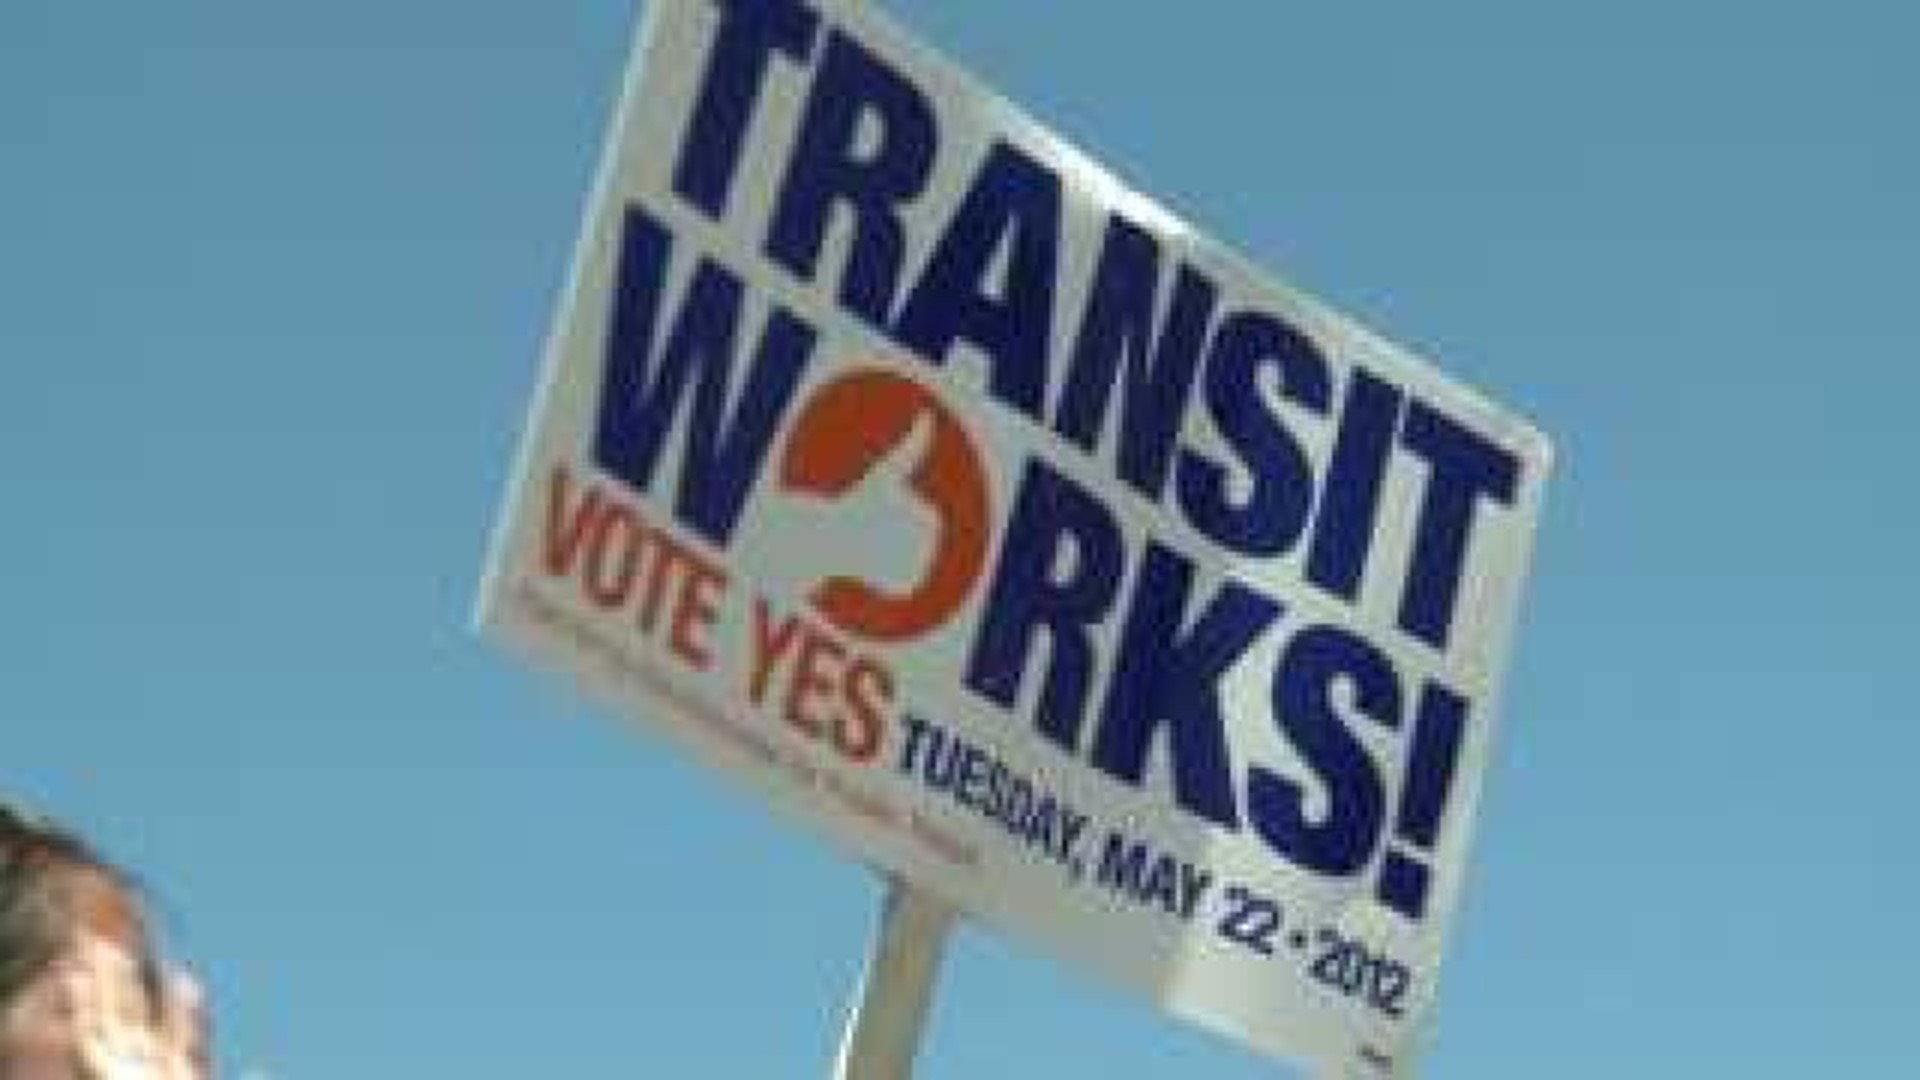 Last Minute Campaign for Transit Tax